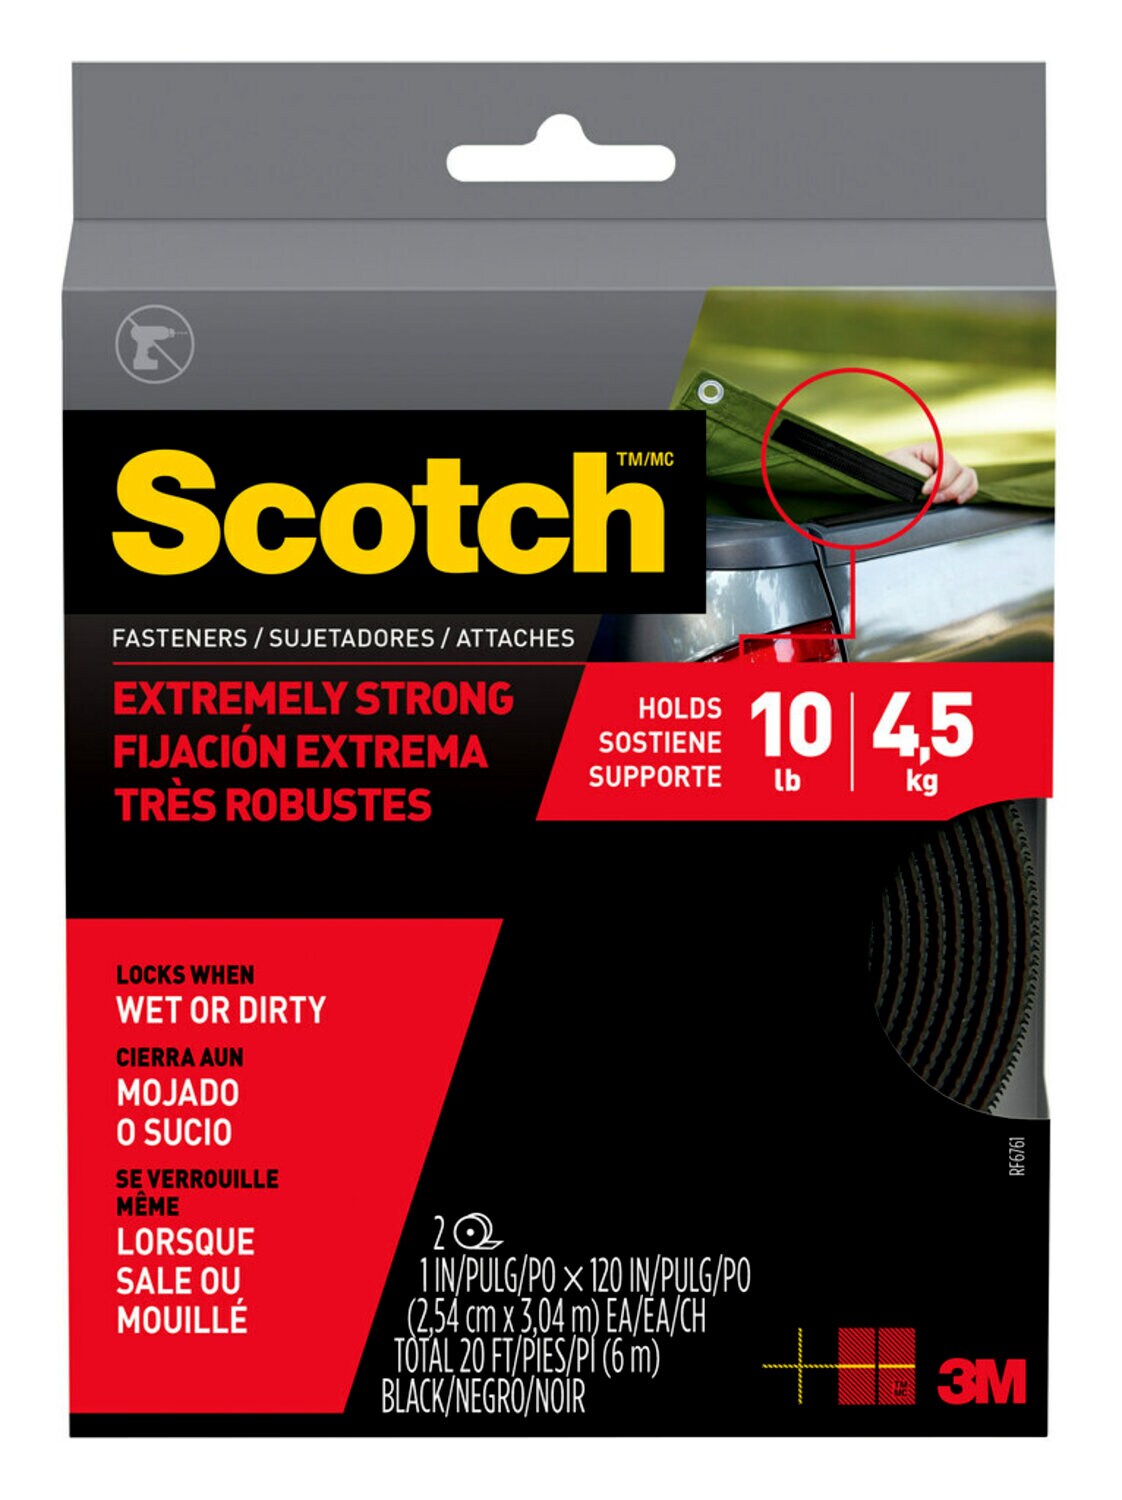 7010313602 - Scotch Extreme Fasteners RF6761, 1 in x 10 ft (25,4 mm x 3,04 m) Black
1 Set of Strips